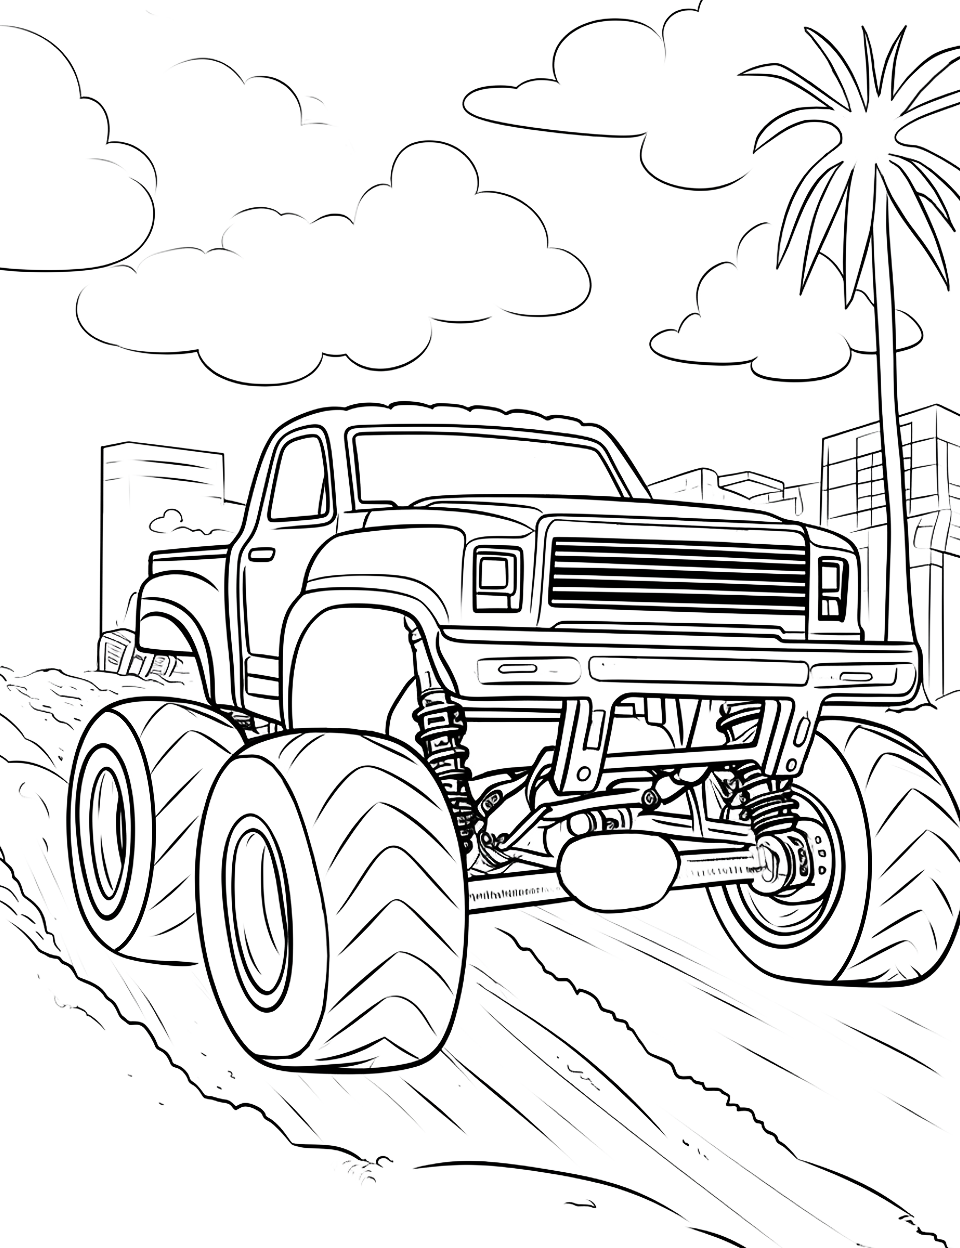 Beach Party Race Monster Truck Coloring Page - A monster truck racing on a sunny beach with palm trees.